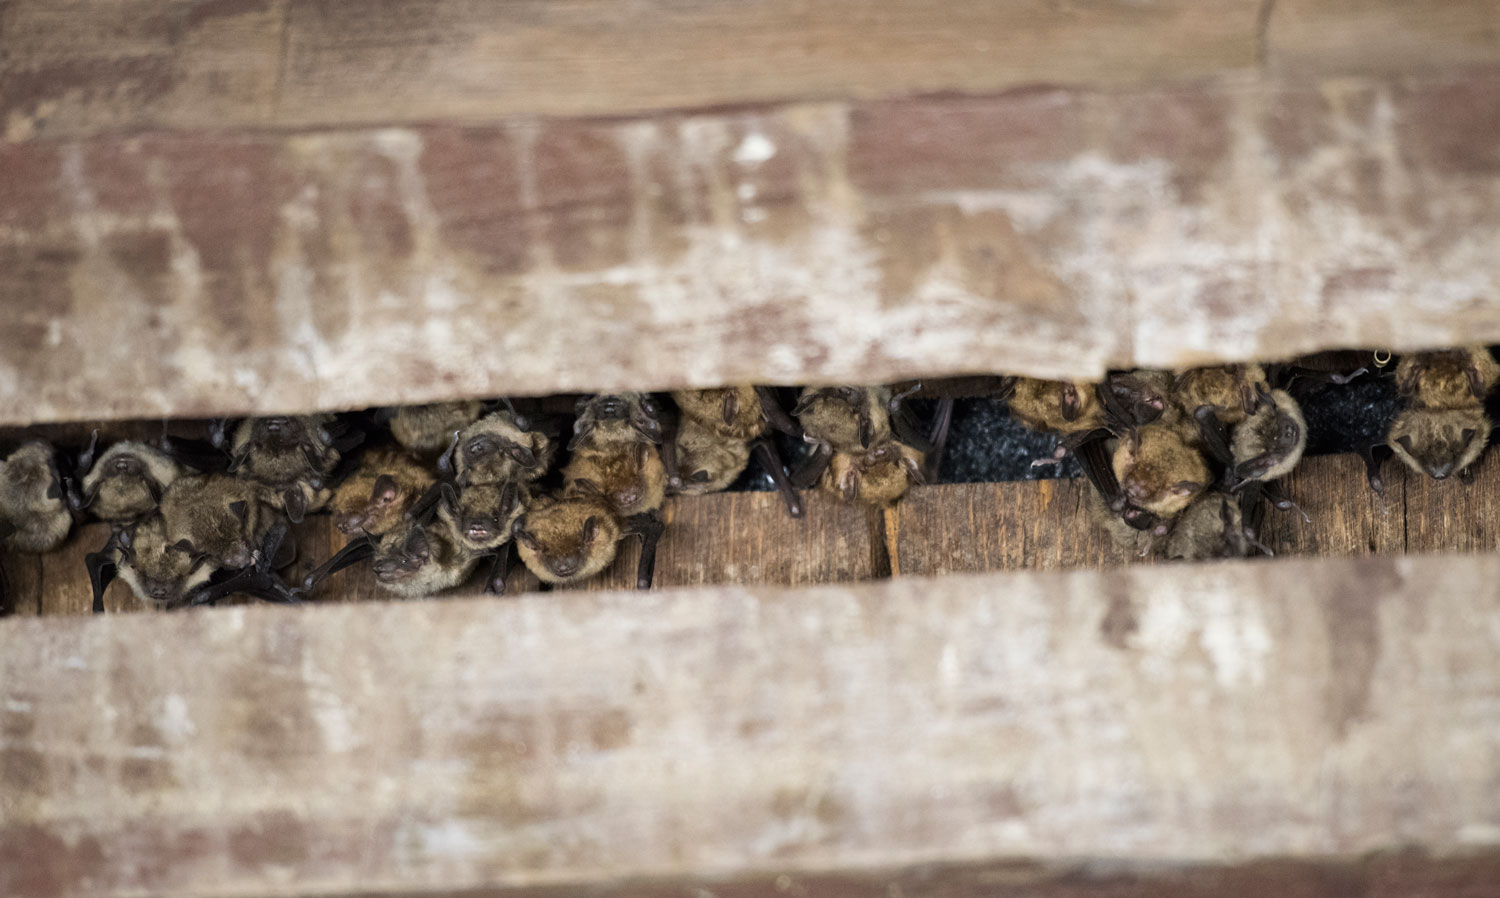 Bats lined up in roof rafters